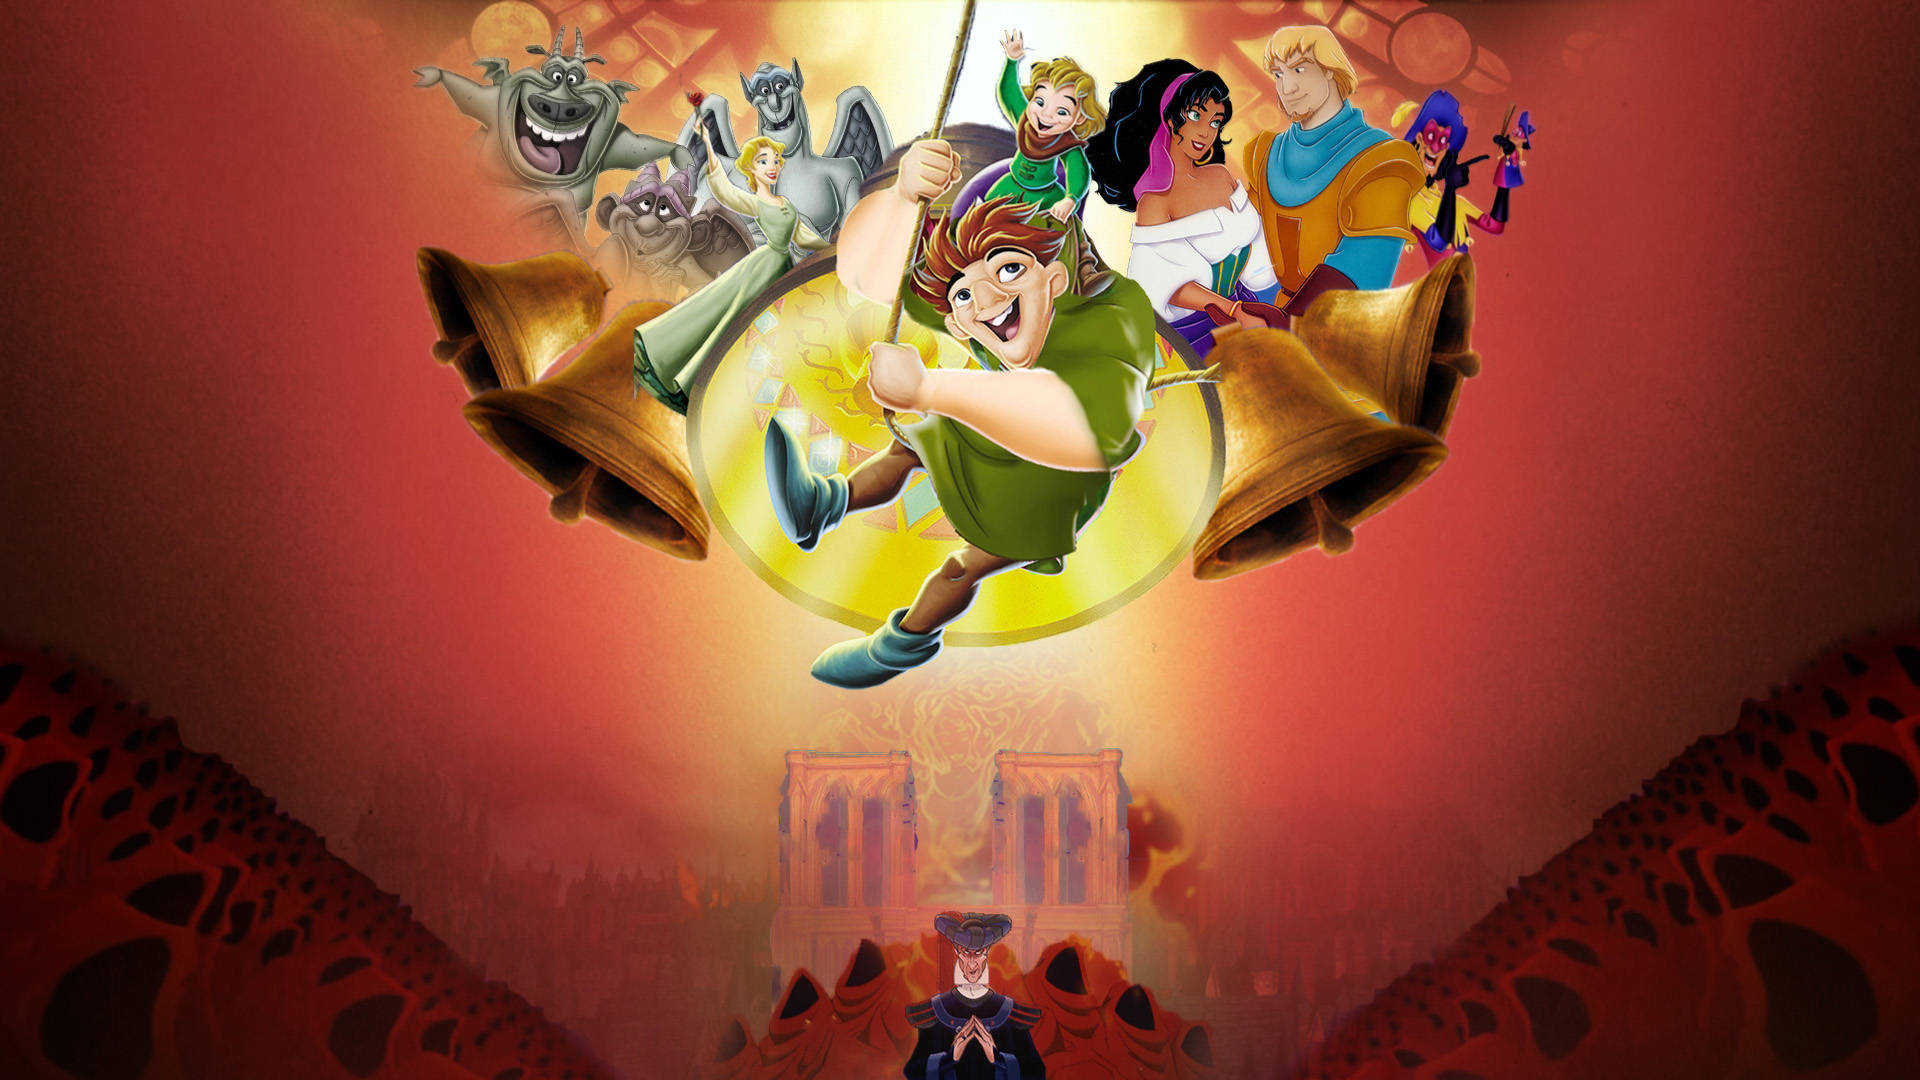 Download Hunchback Of Notre Dame Main Characters Wallpaper | Wallpapers.com